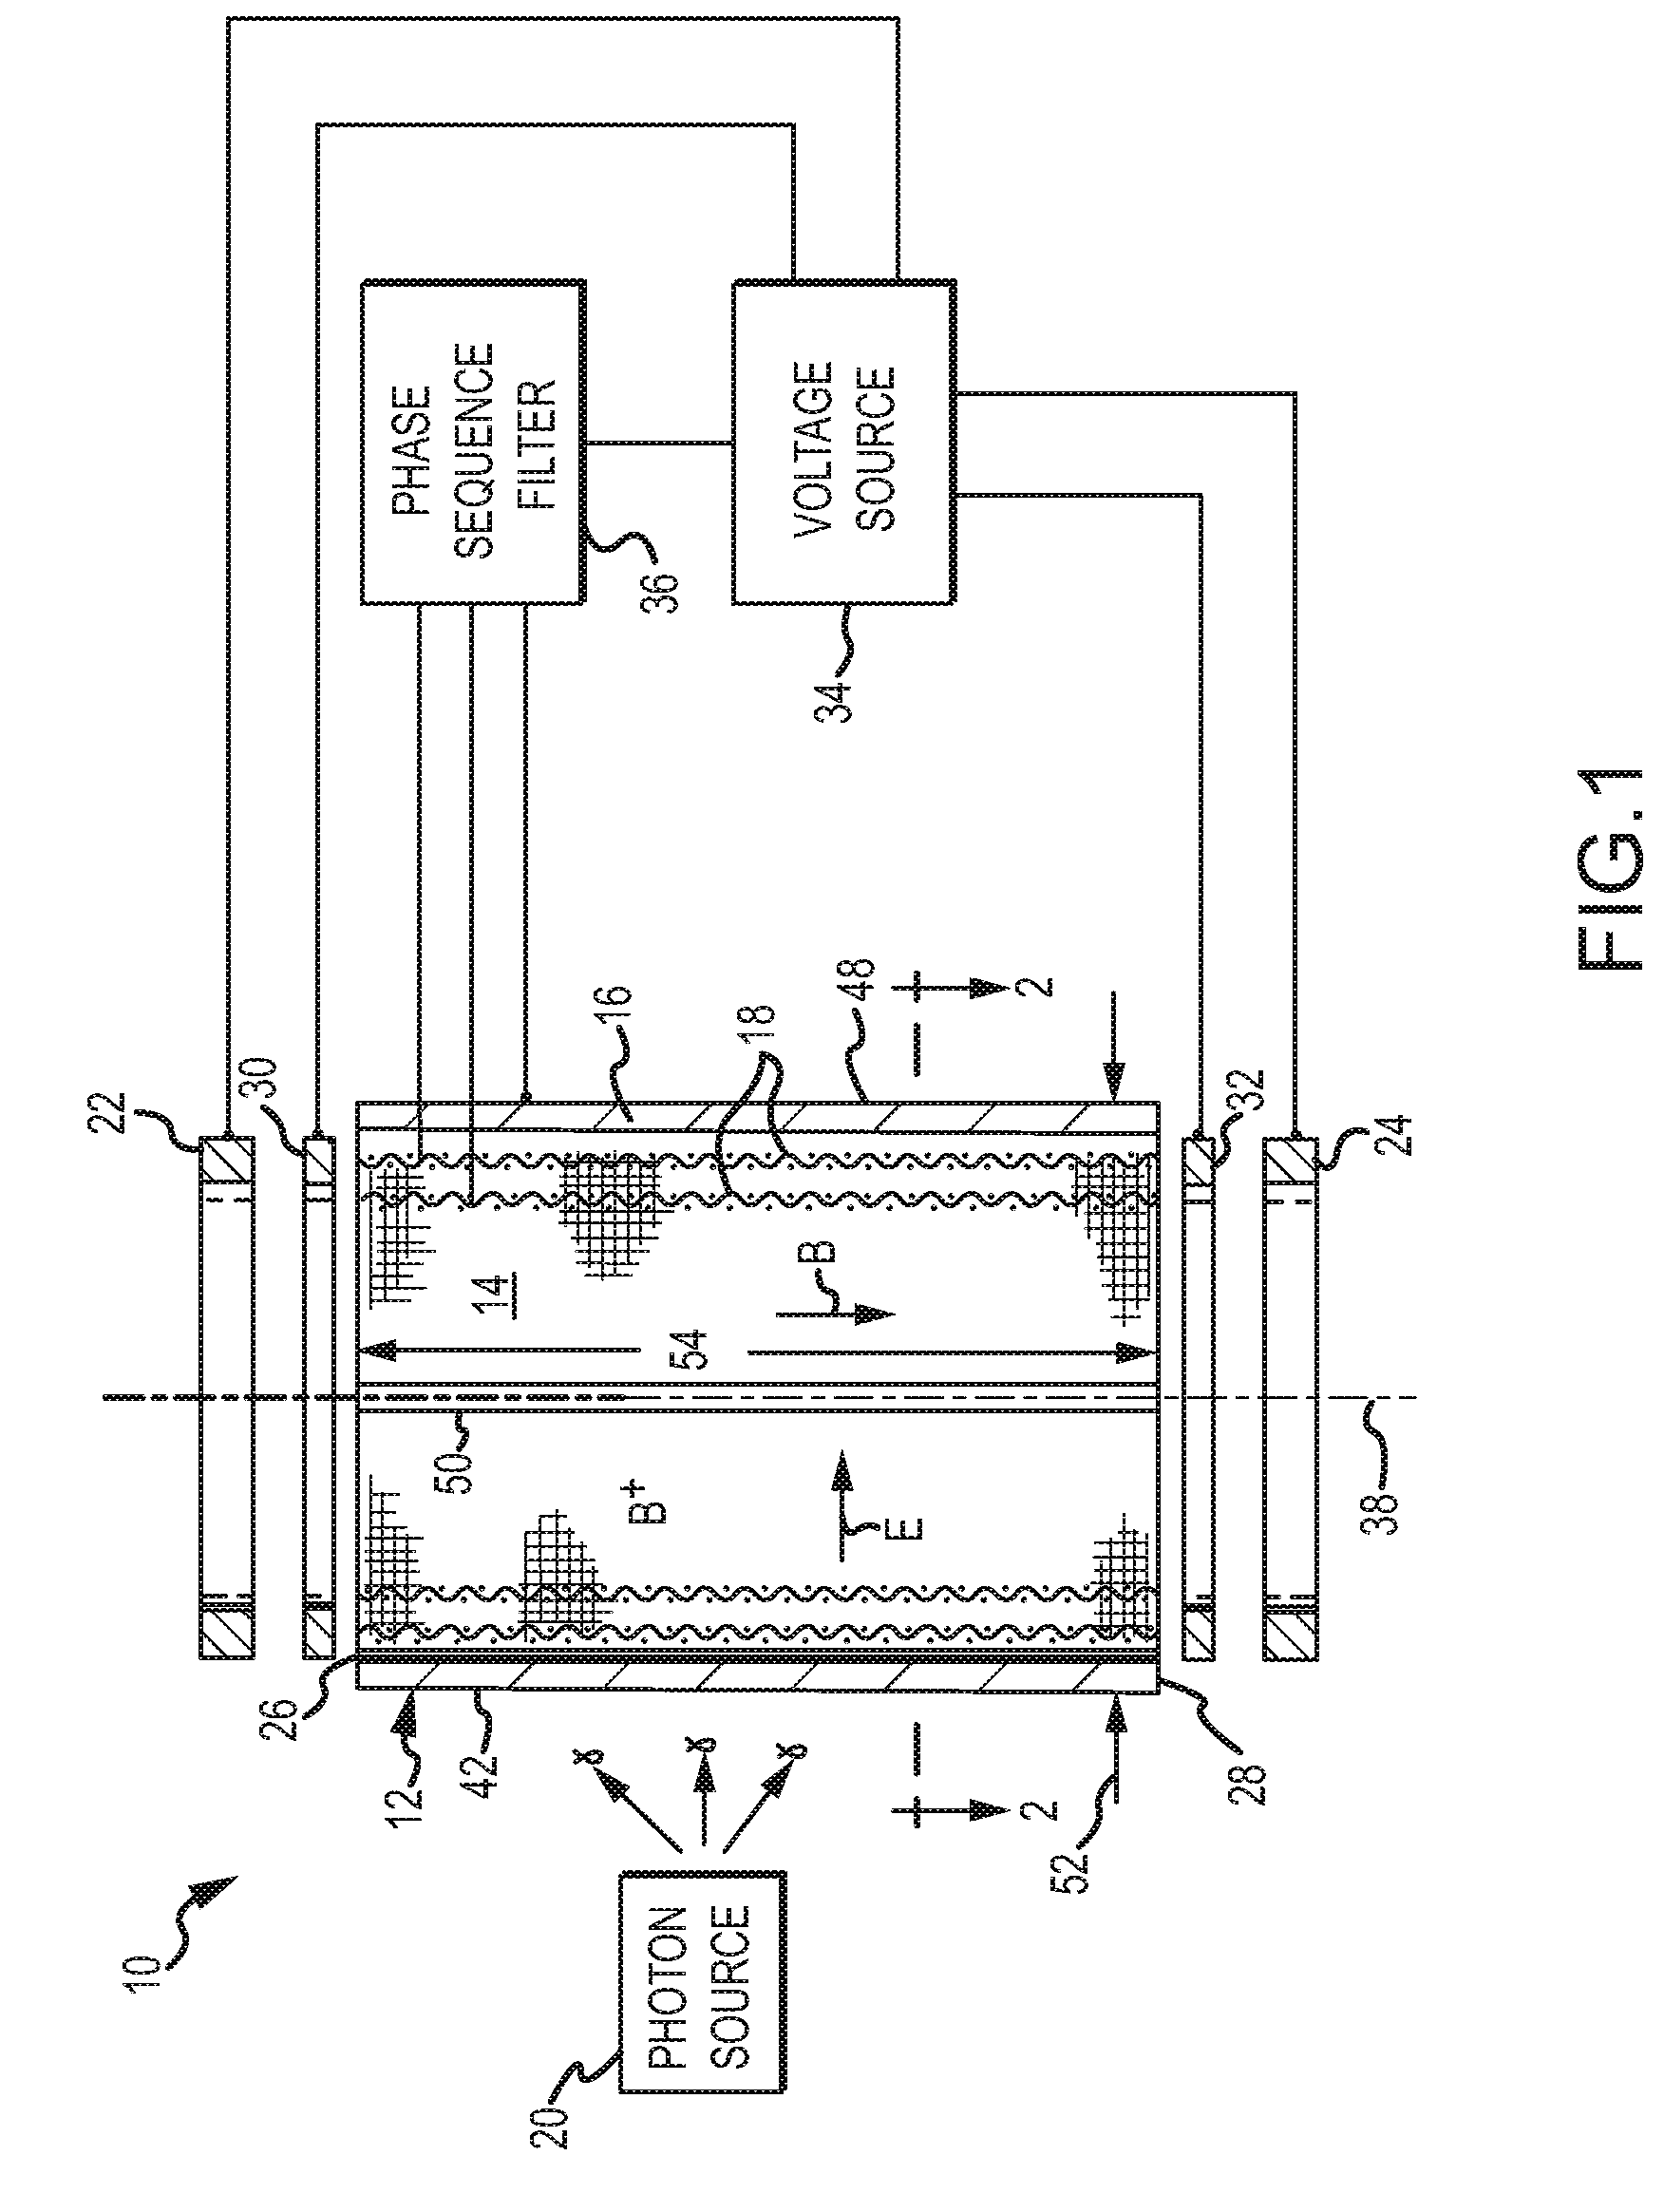 Methods and apparatus for producing and storing positrons and protons